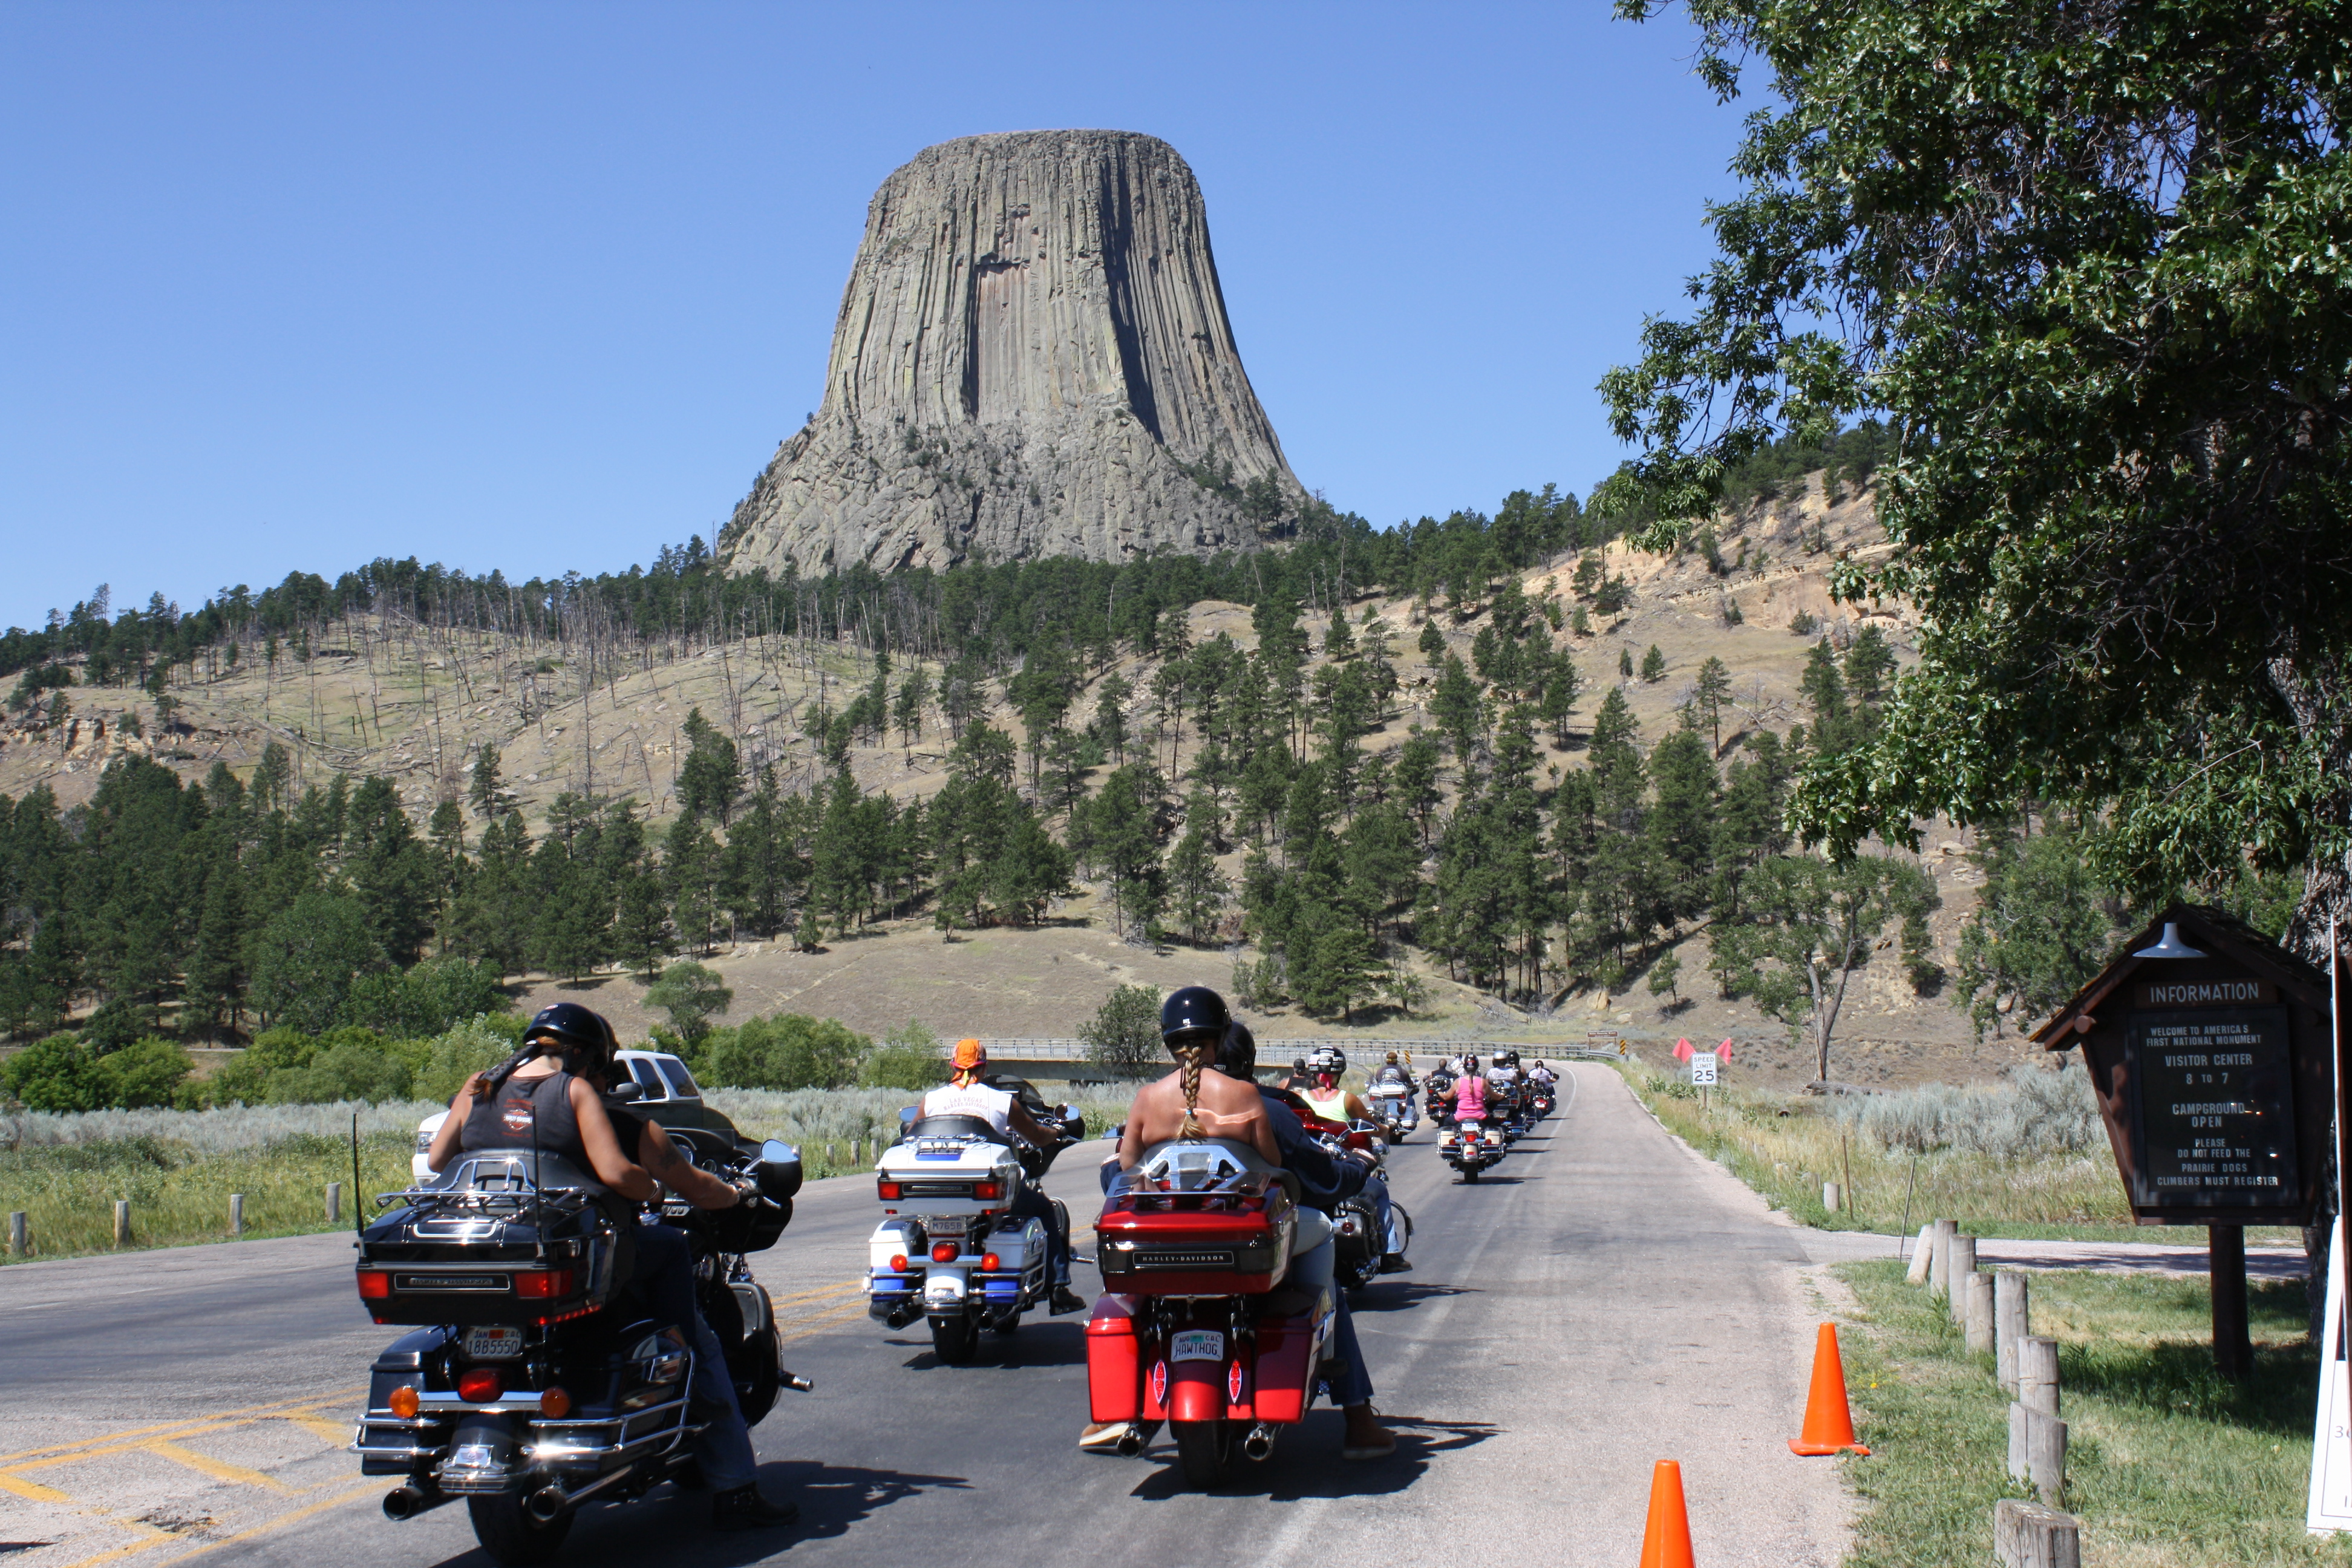 Motorcycles at entrance to Devils Tower